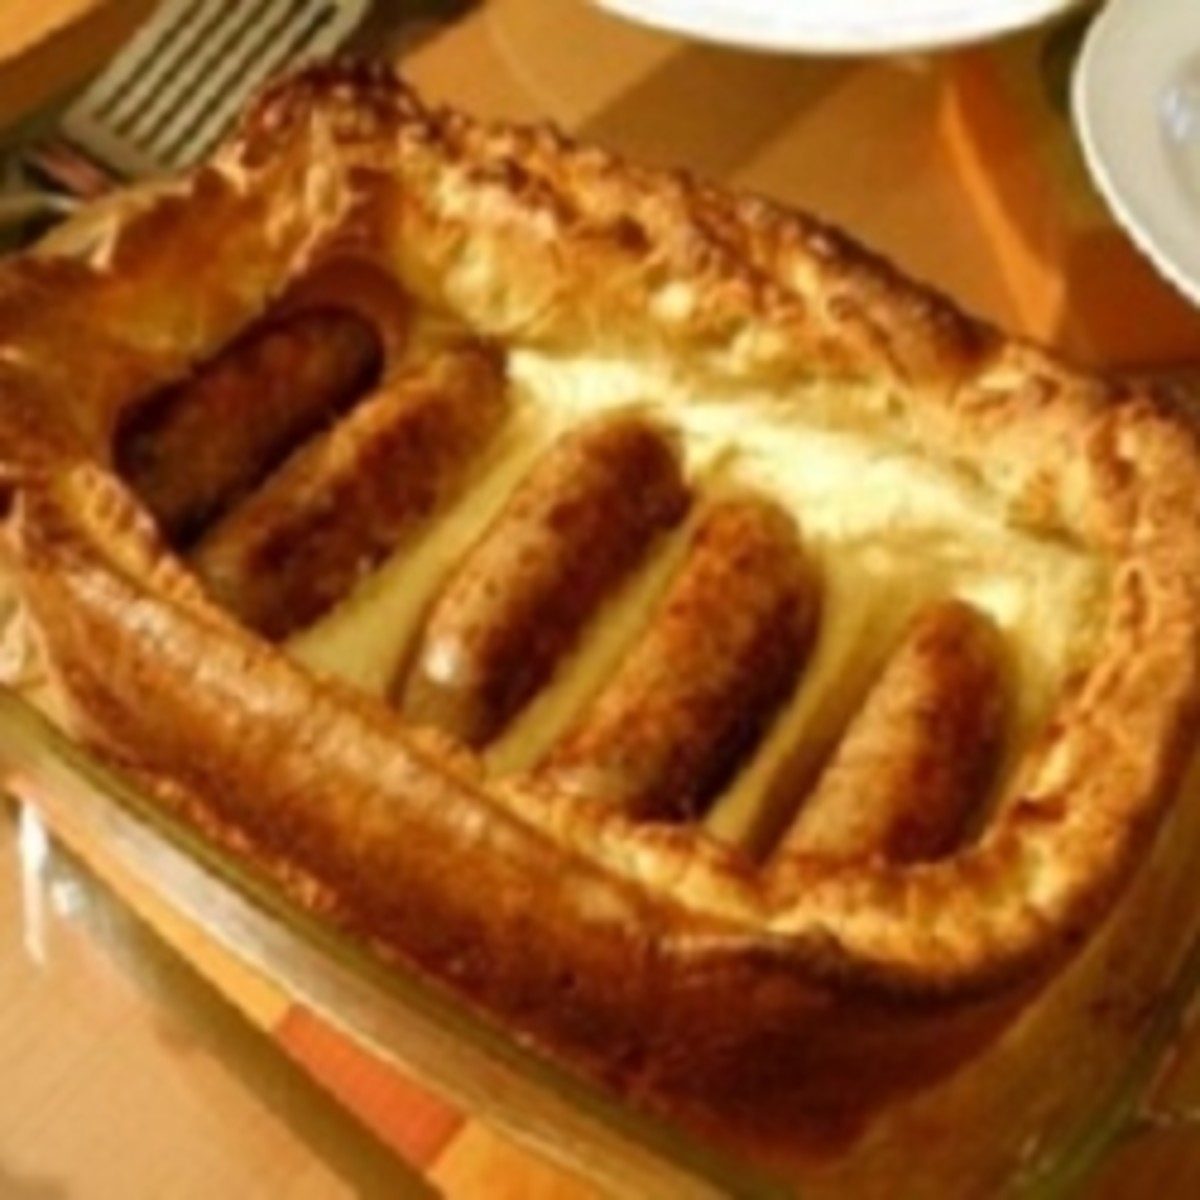 Toad in the Hole - sausages baked in Yorkshire pudding batter